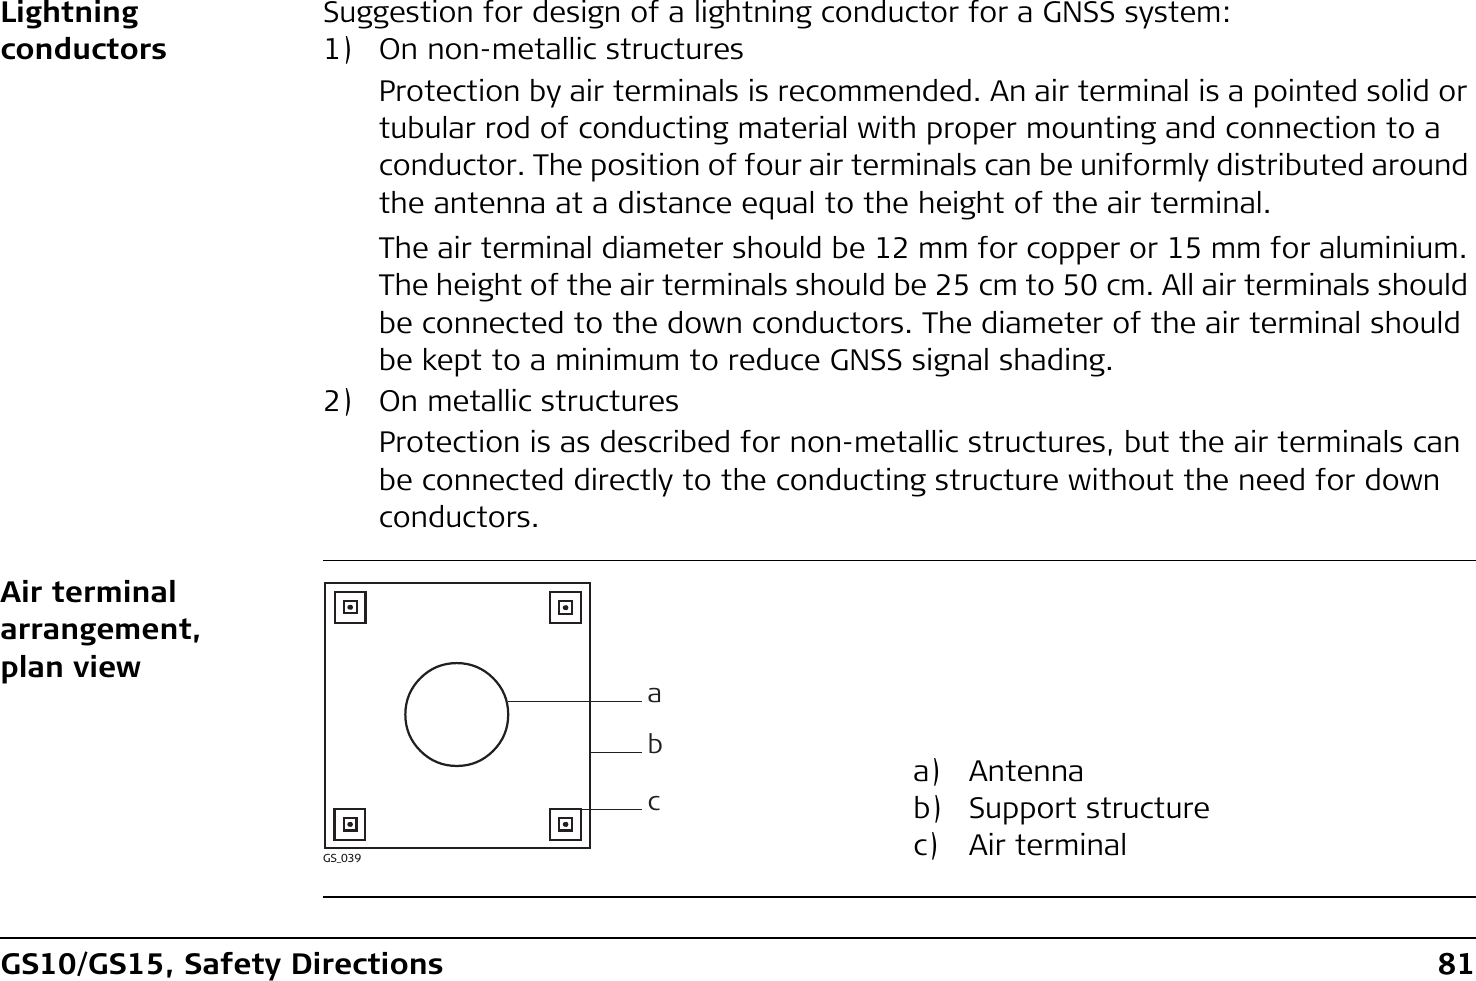 GS10/GS15, Safety Directions 81Lightning conductorsSuggestion for design of a lightning conductor for a GNSS system:1) On non-metallic structuresProtection by air terminals is recommended. An air terminal is a pointed solid or tubular rod of conducting material with proper mounting and connection to a conductor. The position of four air terminals can be uniformly distributed around the antenna at a distance equal to the height of the air terminal.The air terminal diameter should be 12 mm for copper or 15 mm for aluminium. The height of the air terminals should be 25 cm to 50 cm. All air terminals should be connected to the down conductors. The diameter of the air terminal should be kept to a minimum to reduce GNSS signal shading.2) On metallic structuresProtection is as described for non-metallic structures, but the air terminals can be connected directly to the conducting structure without the need for down conductors.Air terminal arrangement, plan viewa) Antennab) Support structurec) Air terminalGS_039abc